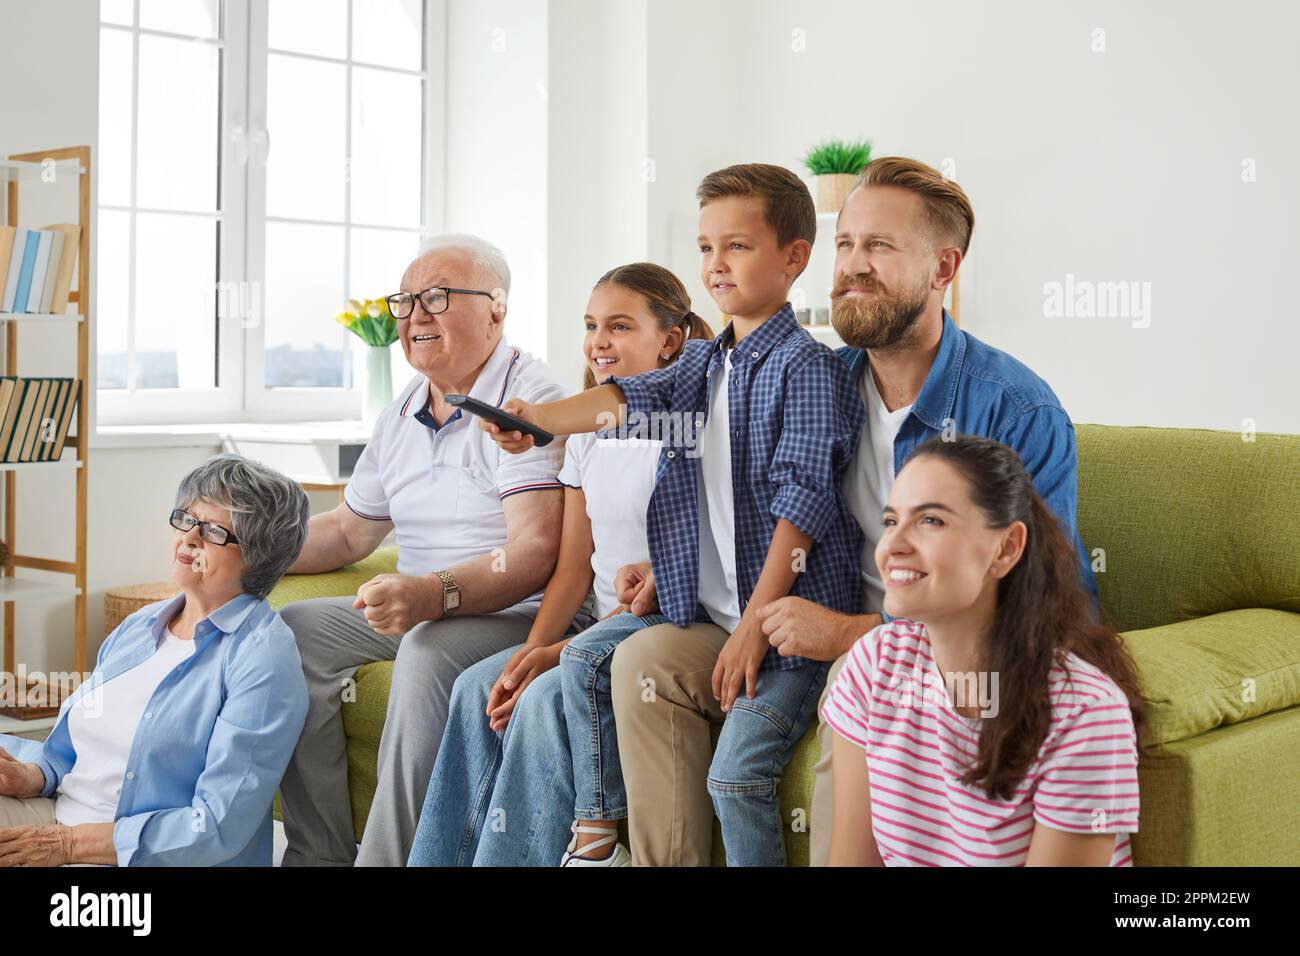 Grandparents, mother, father and two little kids are watching television programs together. Stock Photo